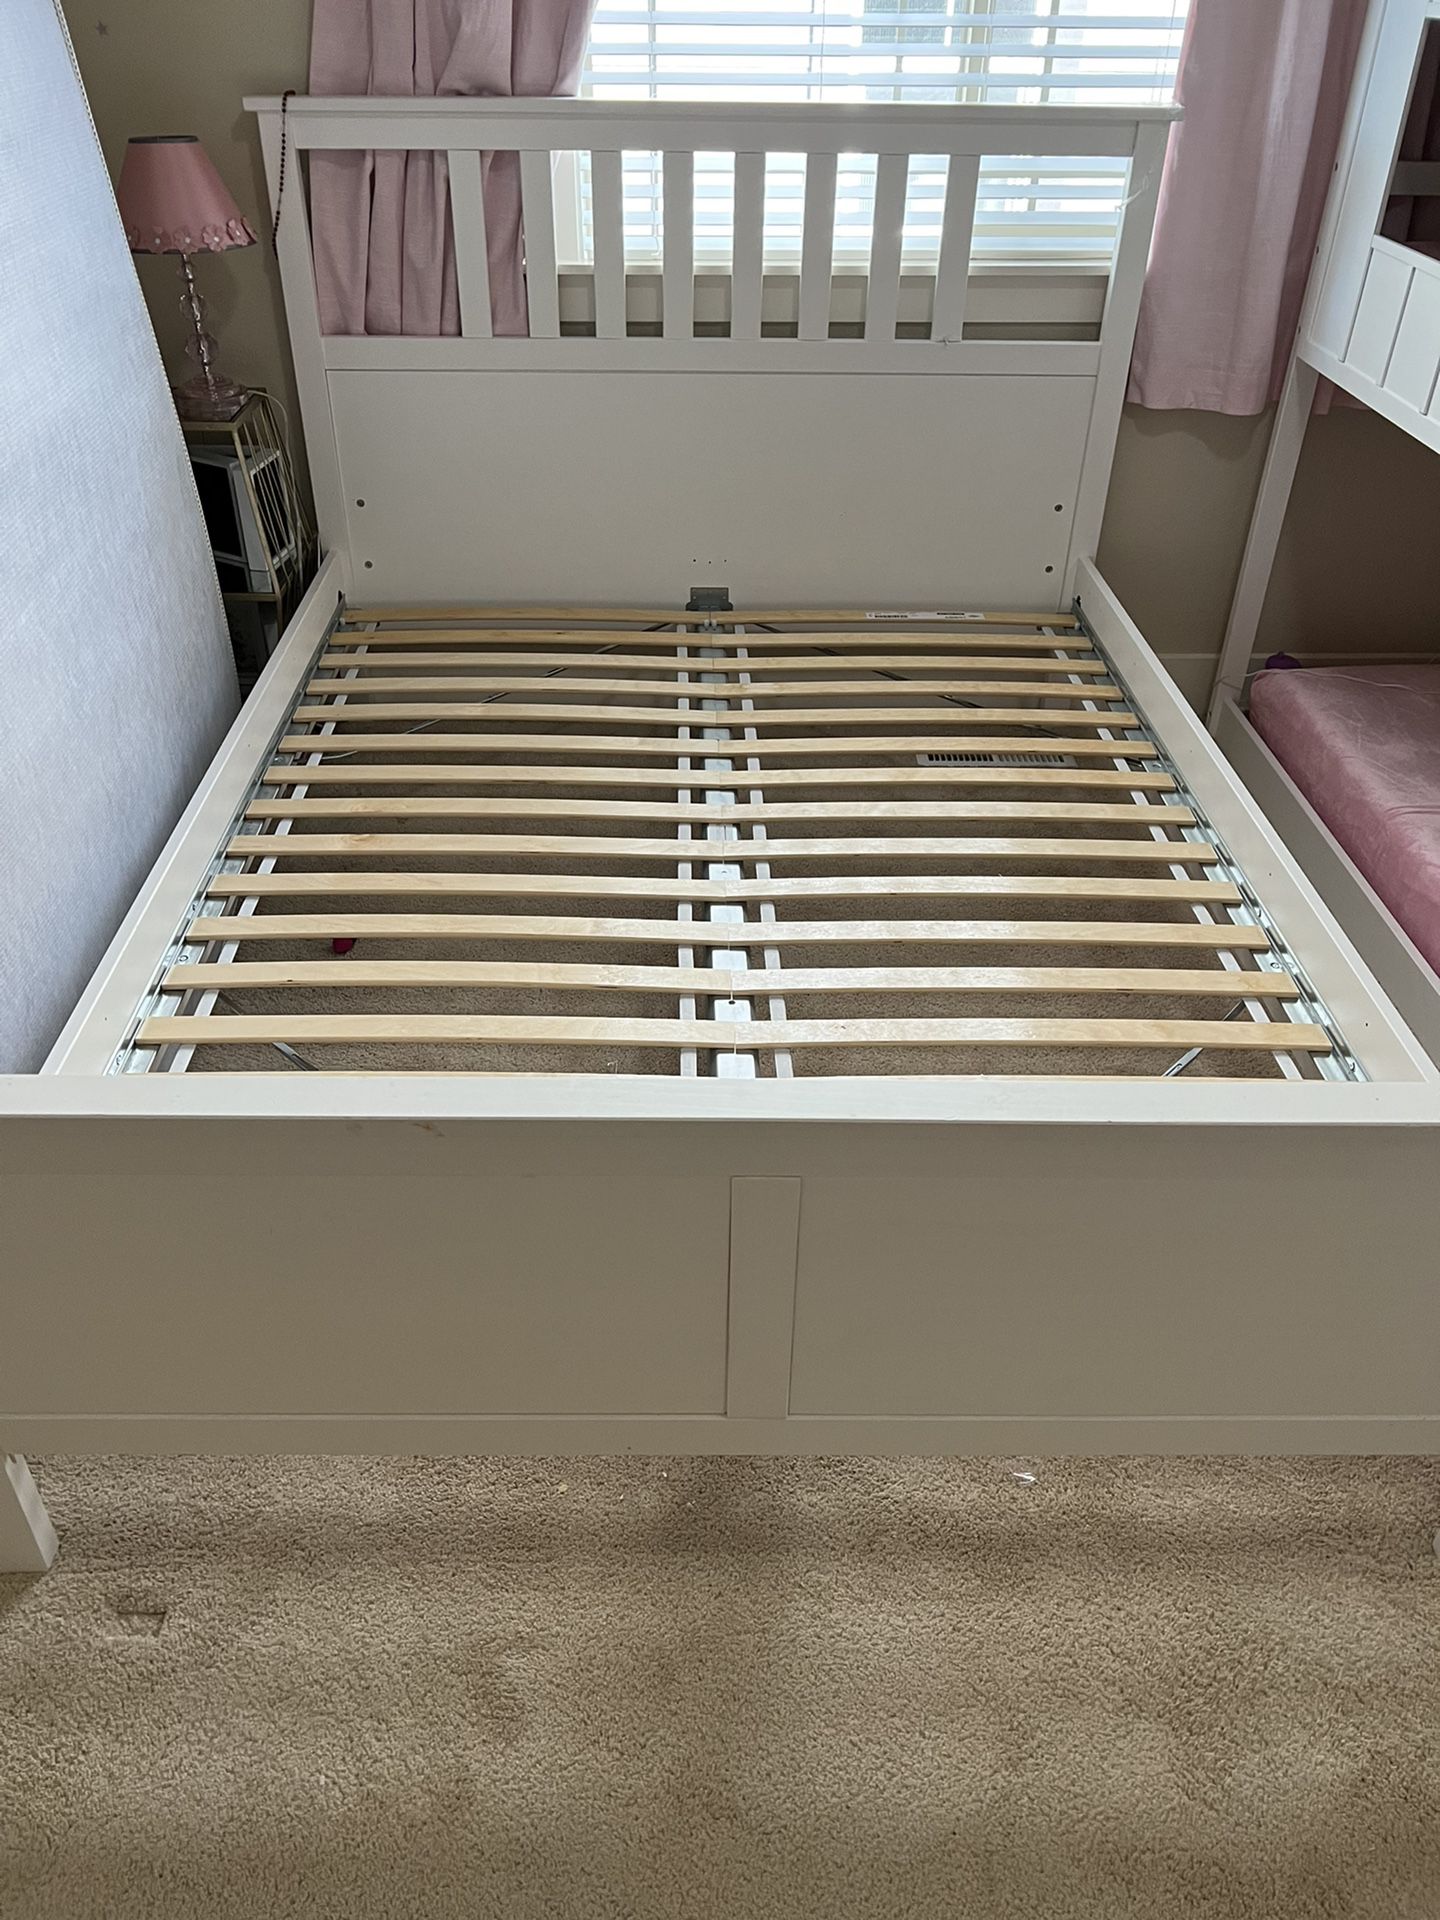 IKEA - HEMNES Bed Frame, Stain, Full/Double in Tigard, OR - OfferUp